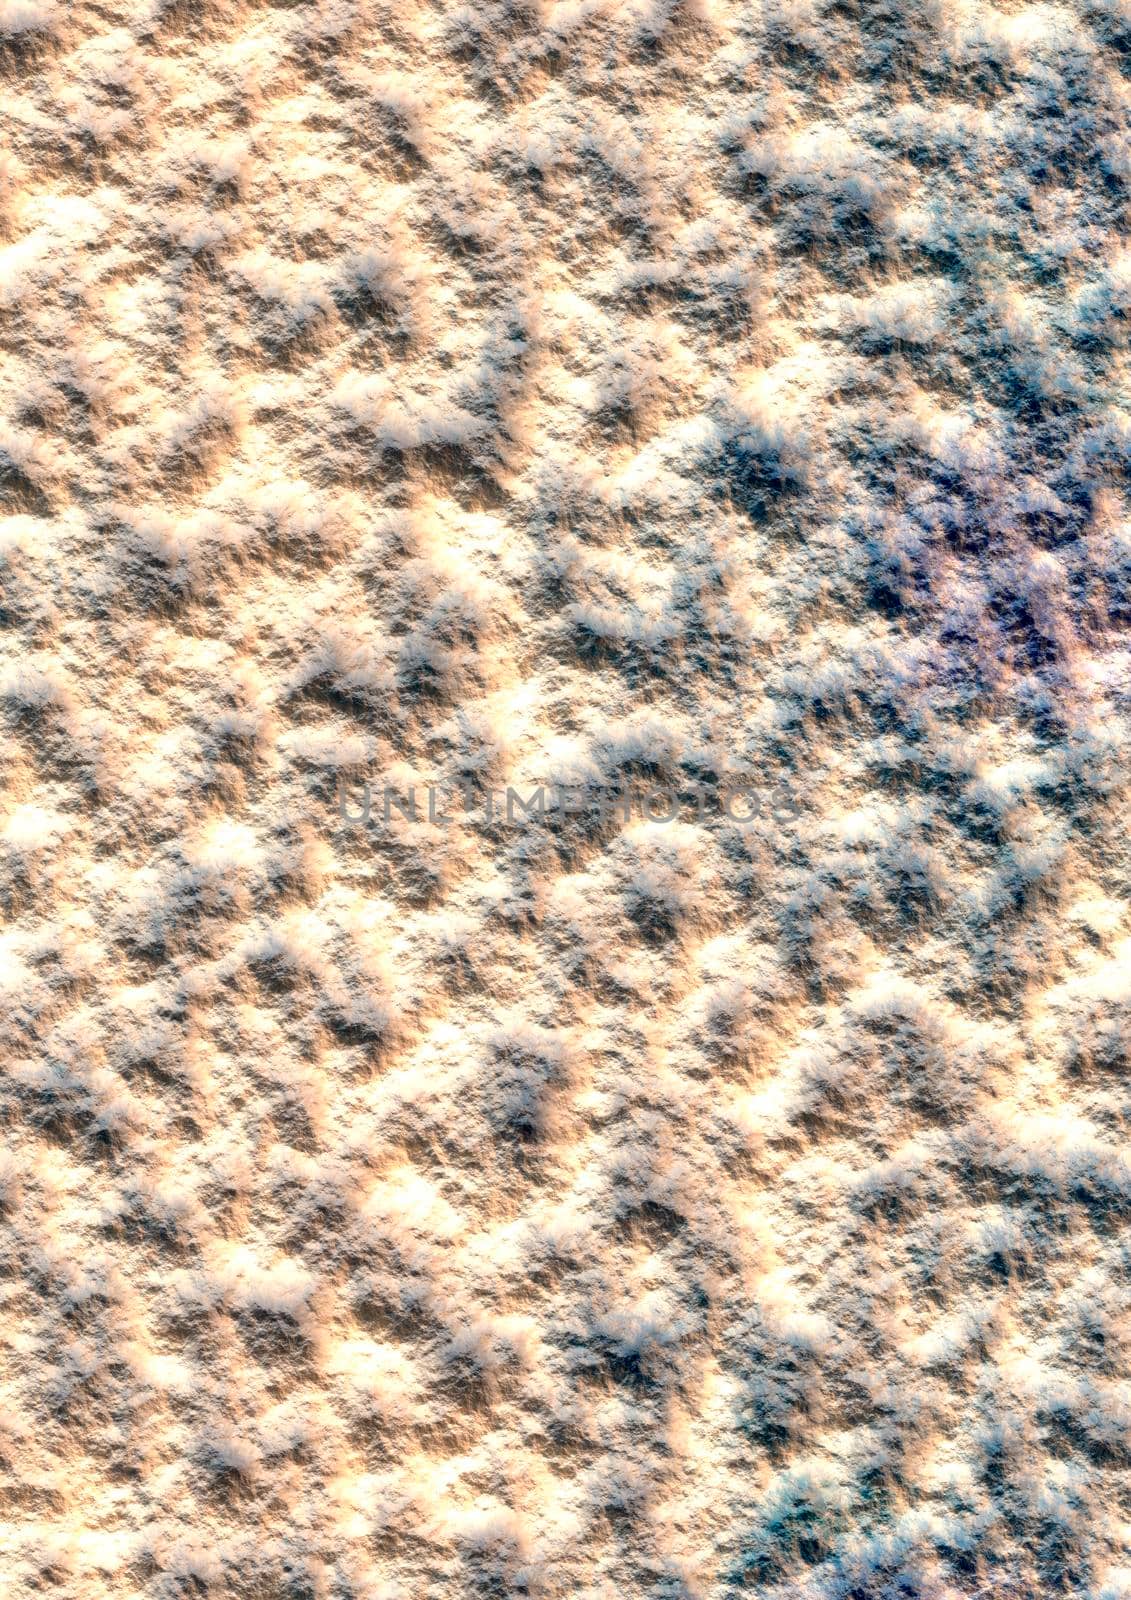 Stone surface close up by richter1910